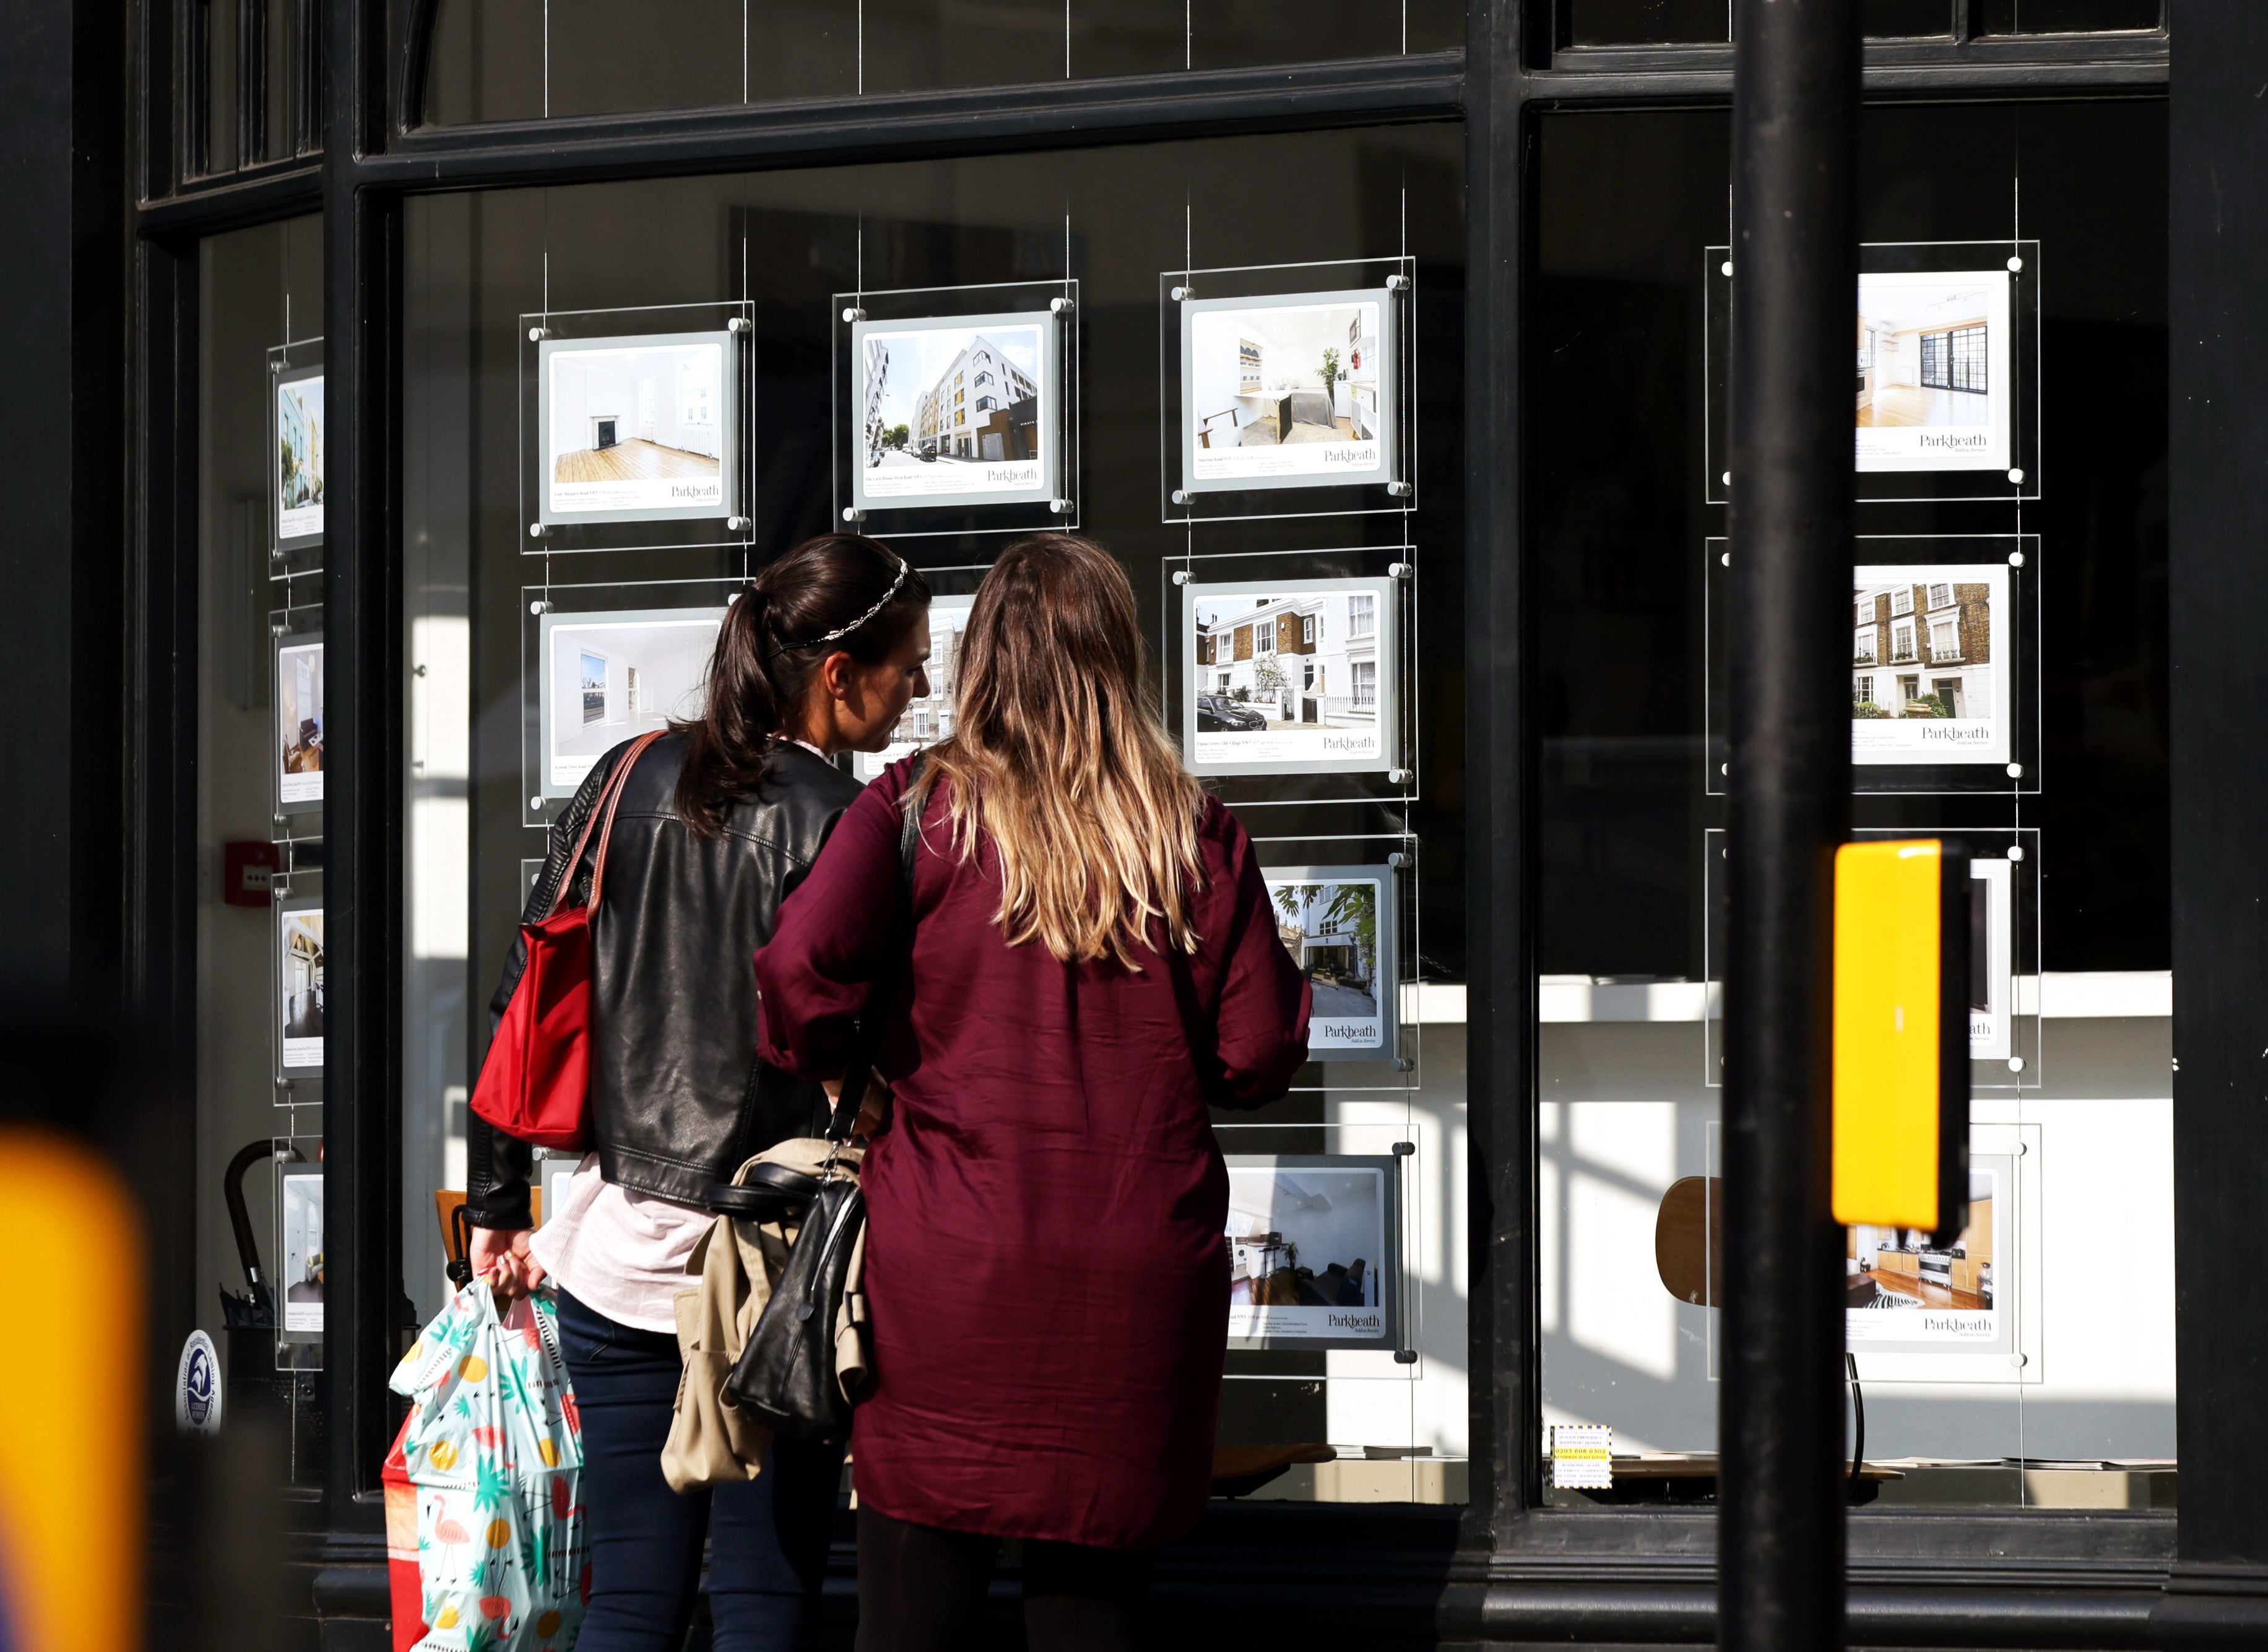 Nearly three in 10 property sales in August were to first-time buyers, according to Propertymark (Yui Mok/PA)